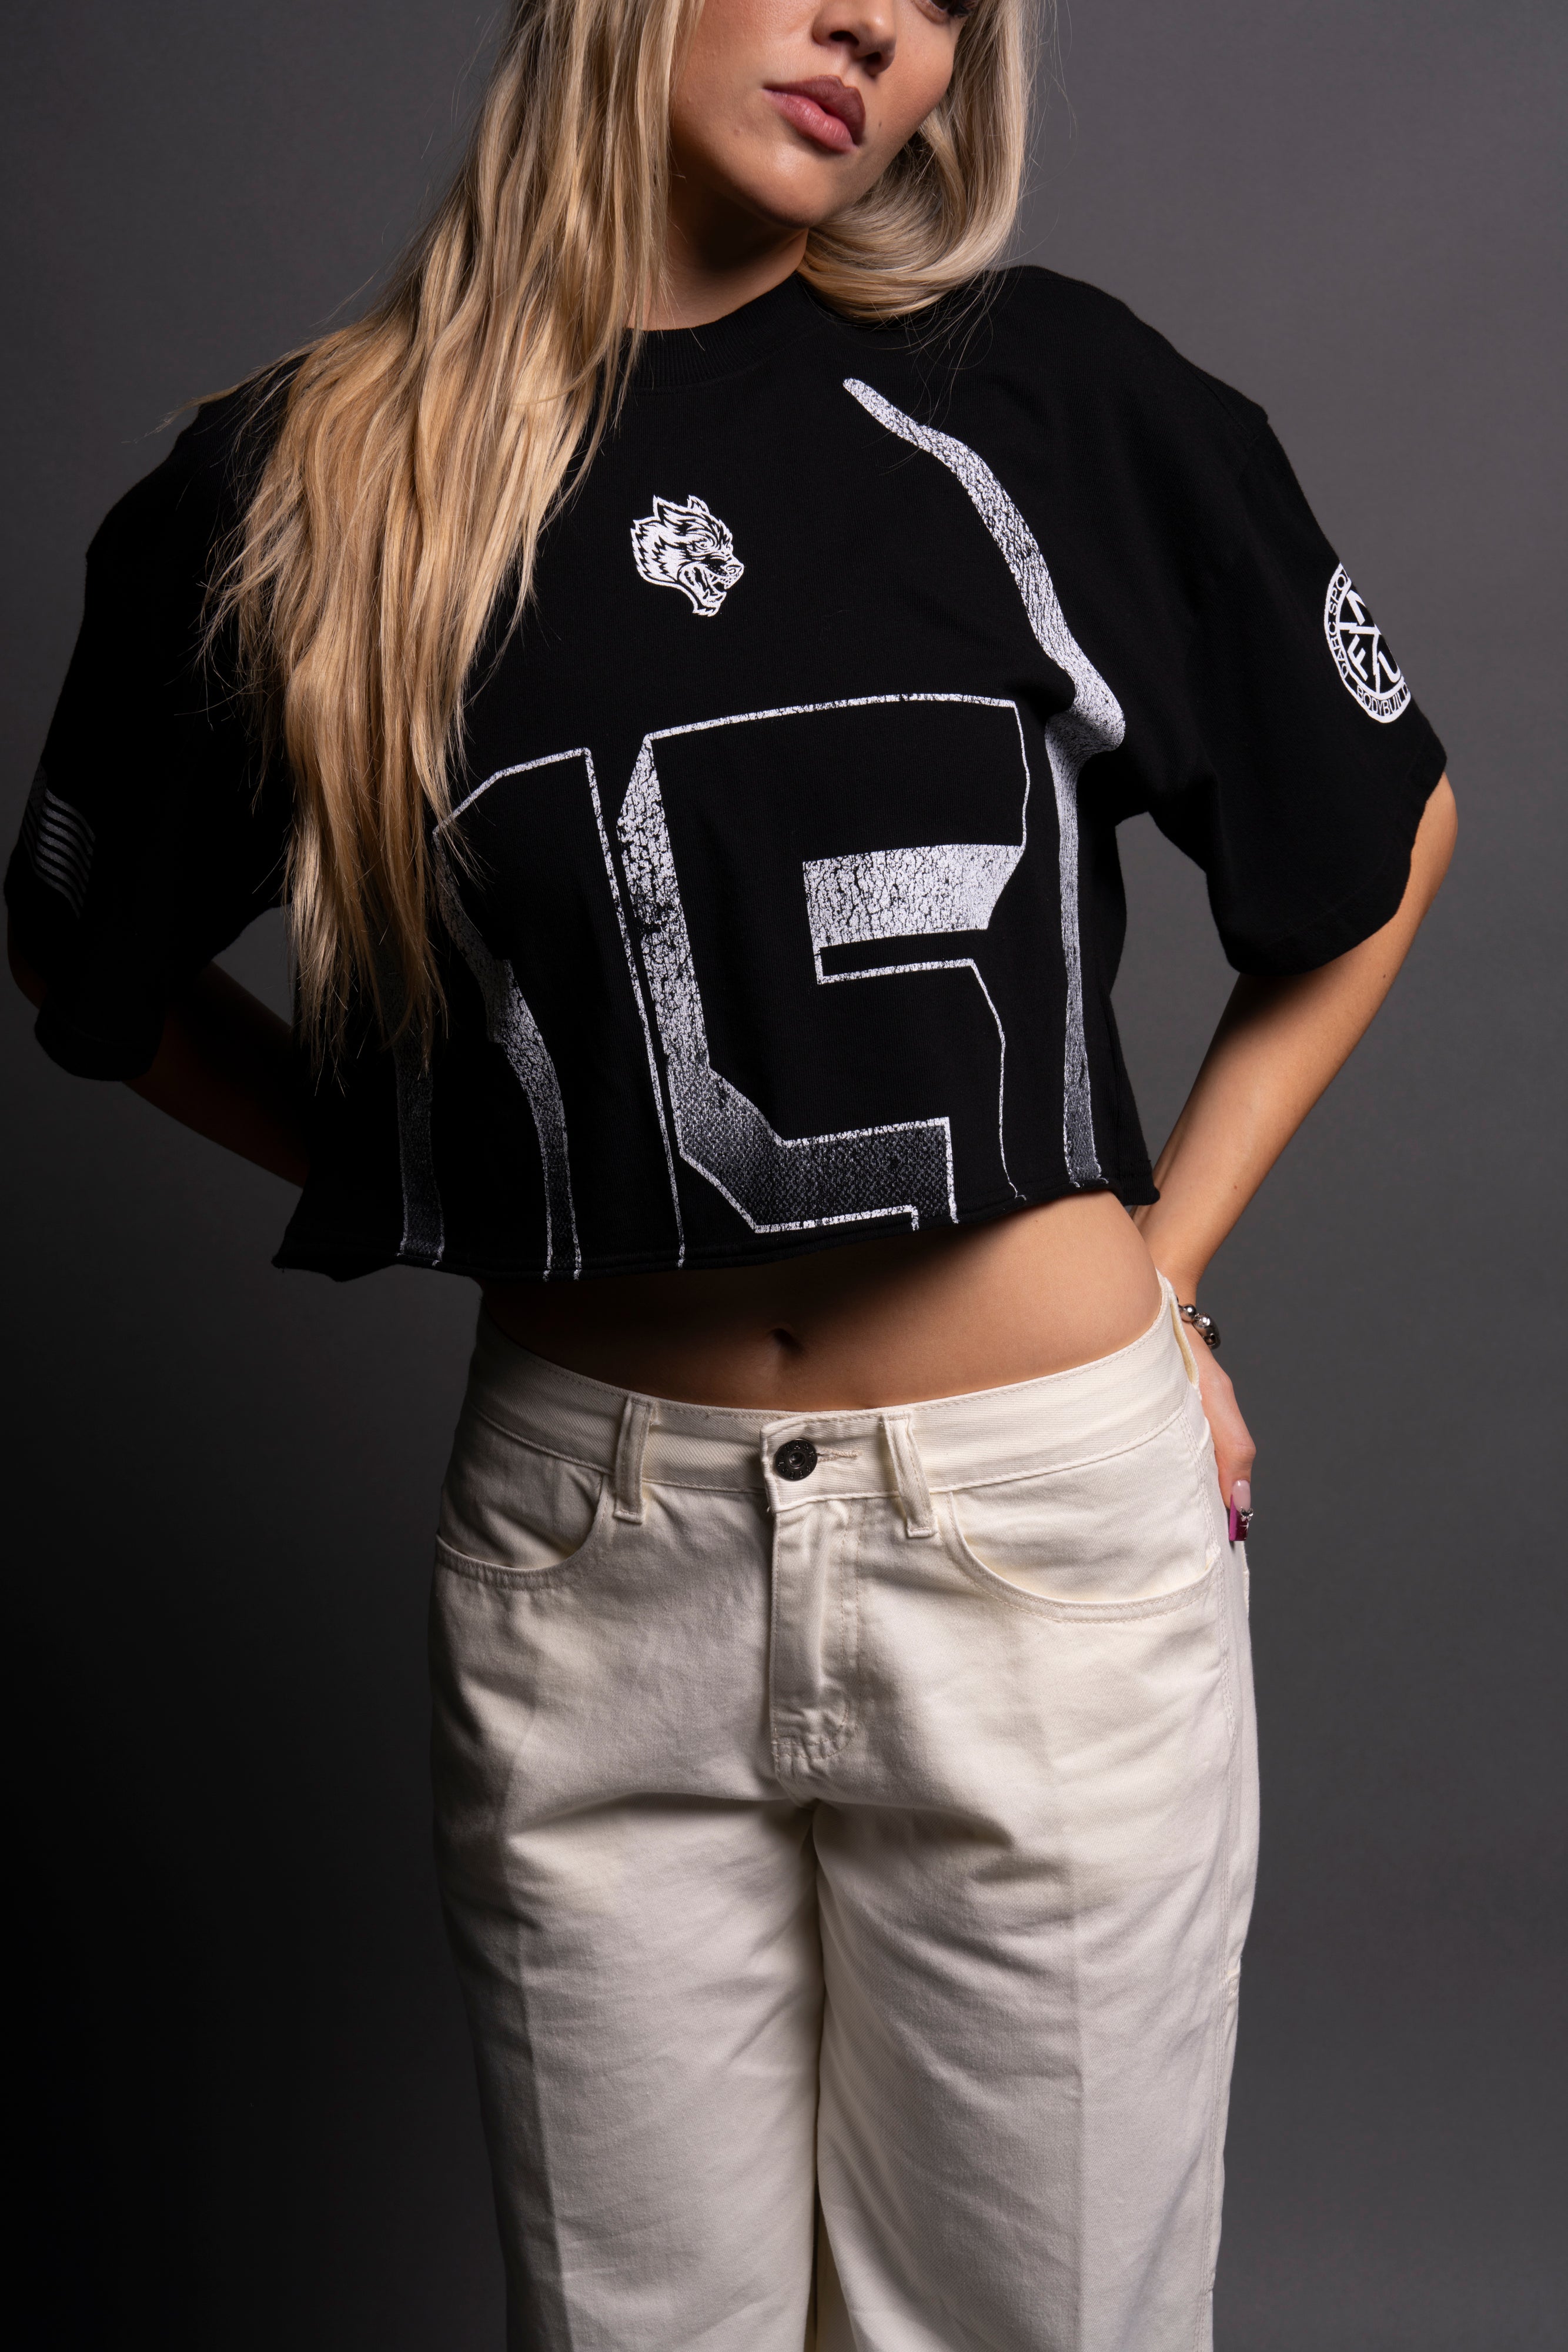 She Game Time "Premium" Oversized (Cropped) Tee in Black